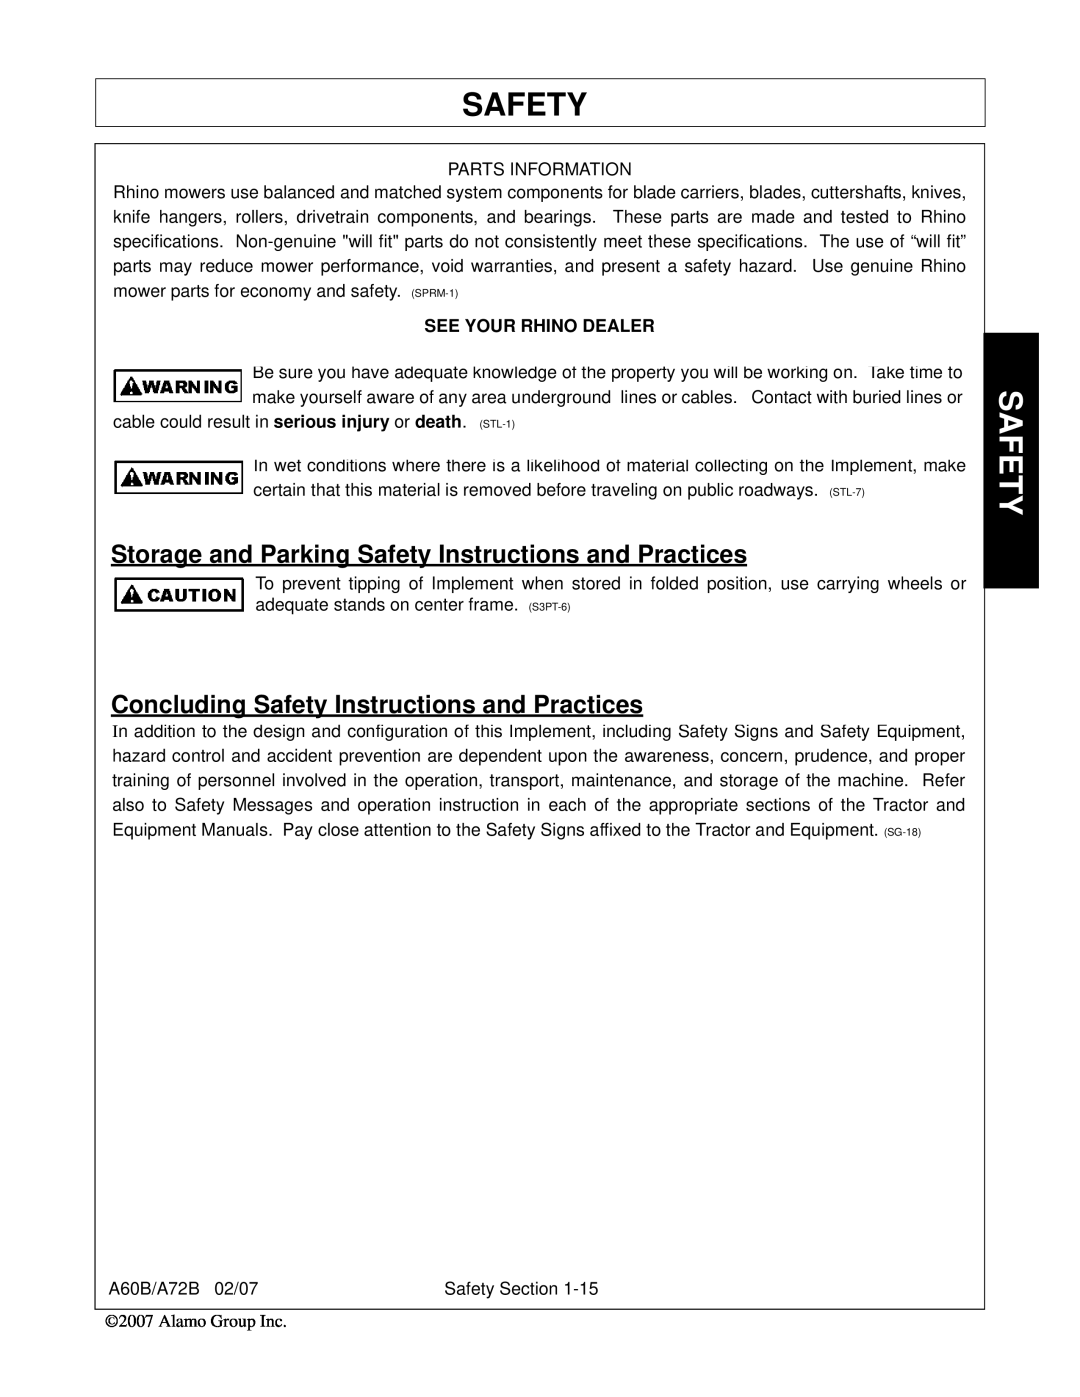 Alamo A60B, A72B manual Storage and Parking Safety Instructions and Practices, Concluding Safety Instructions and Practices 